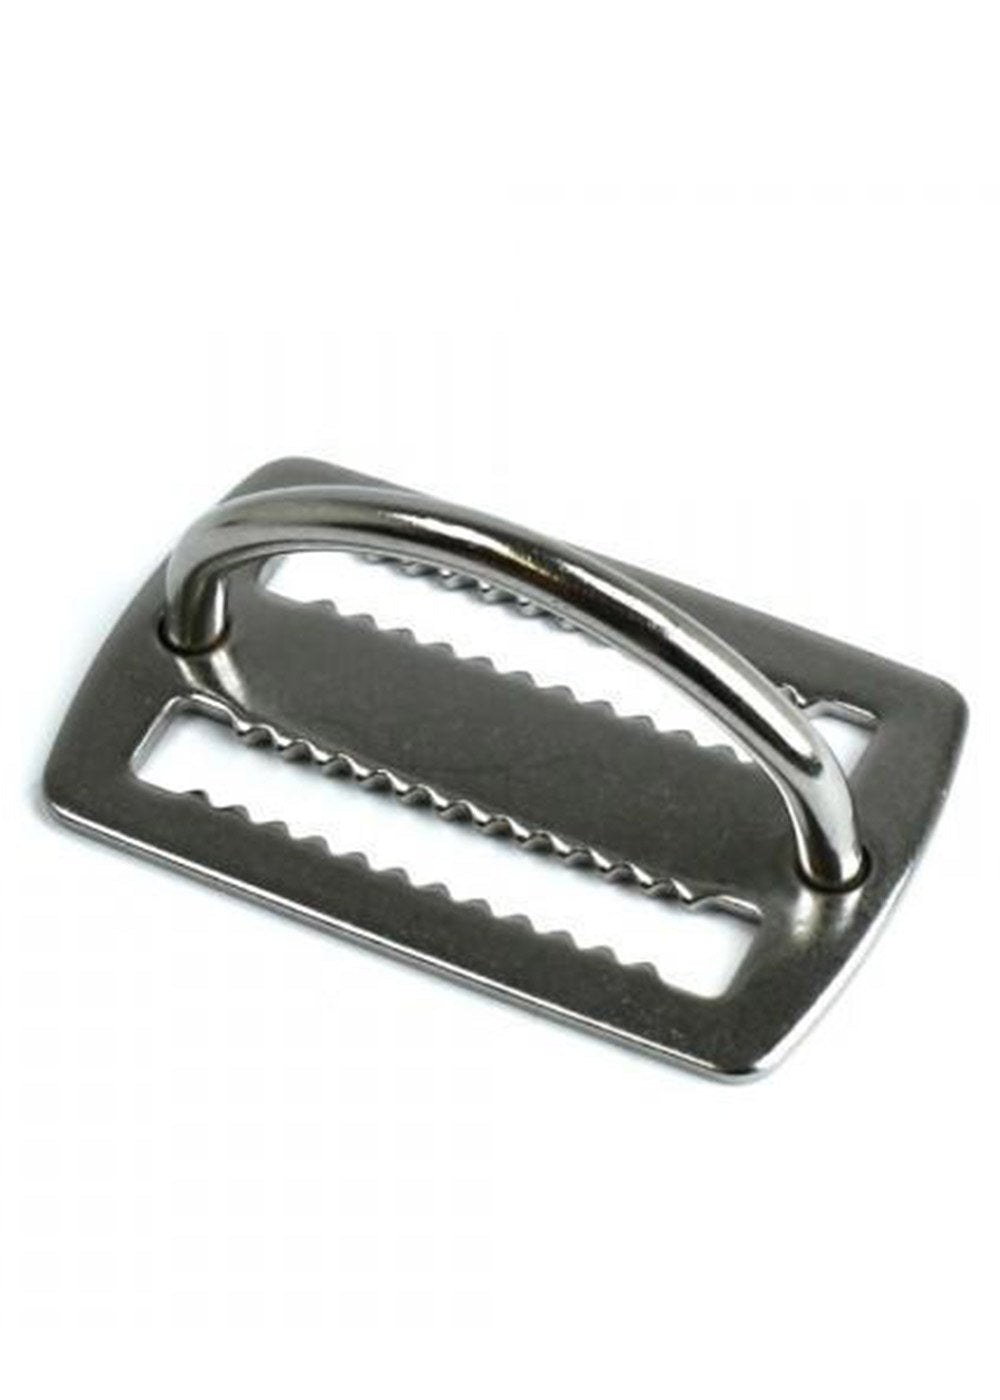 Problue Stainless Weight Belt Keeper With D Ring